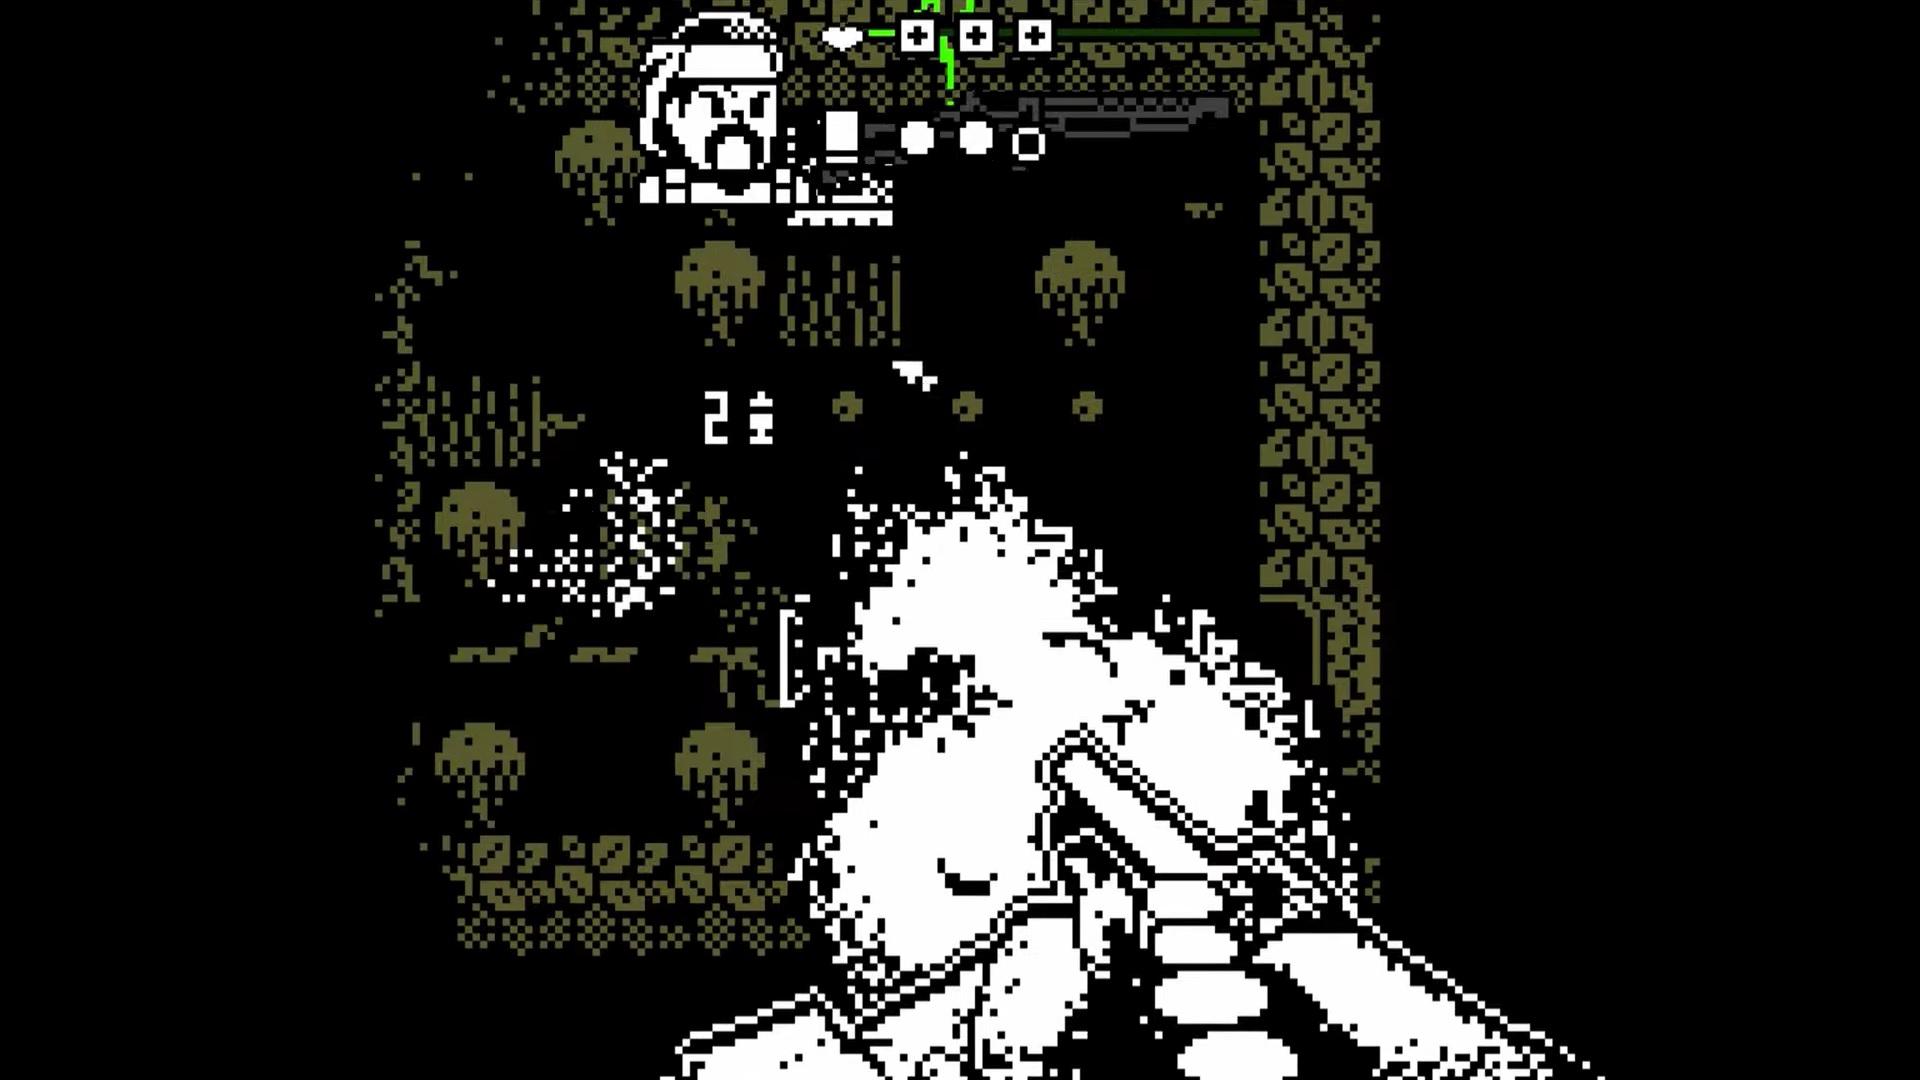 1 Bit Survivor - an image of a shotgun being fired in the foreground while a grim, dark map lays in the background.